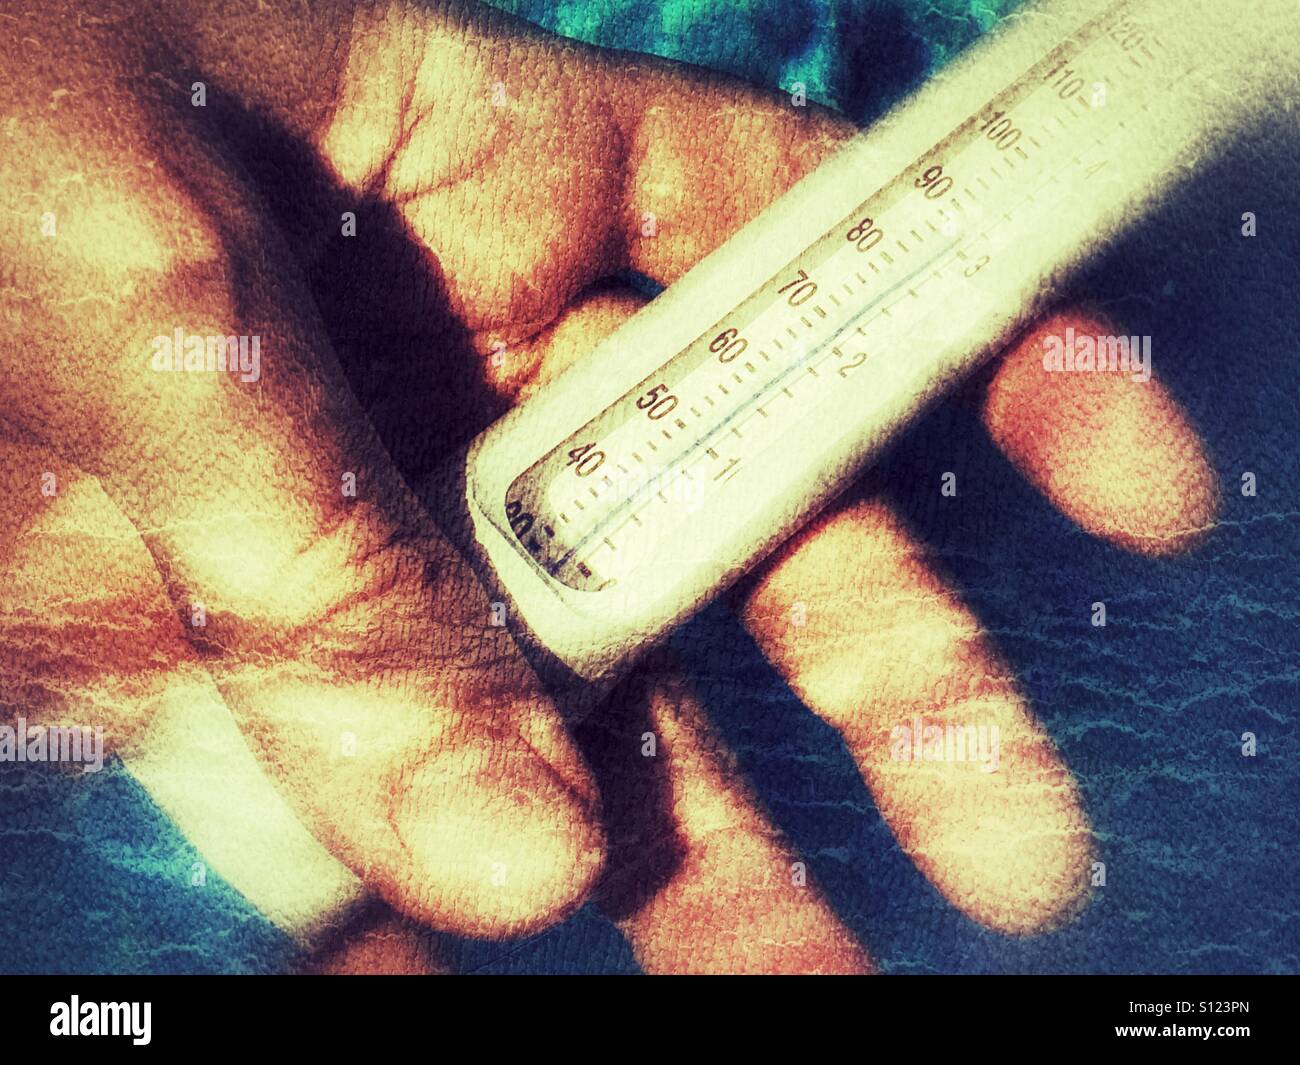 https://c8.alamy.com/comp/S123PN/checking-the-water-temperature-of-a-swimming-pool-using-a-water-thermometer-S123PN.jpg